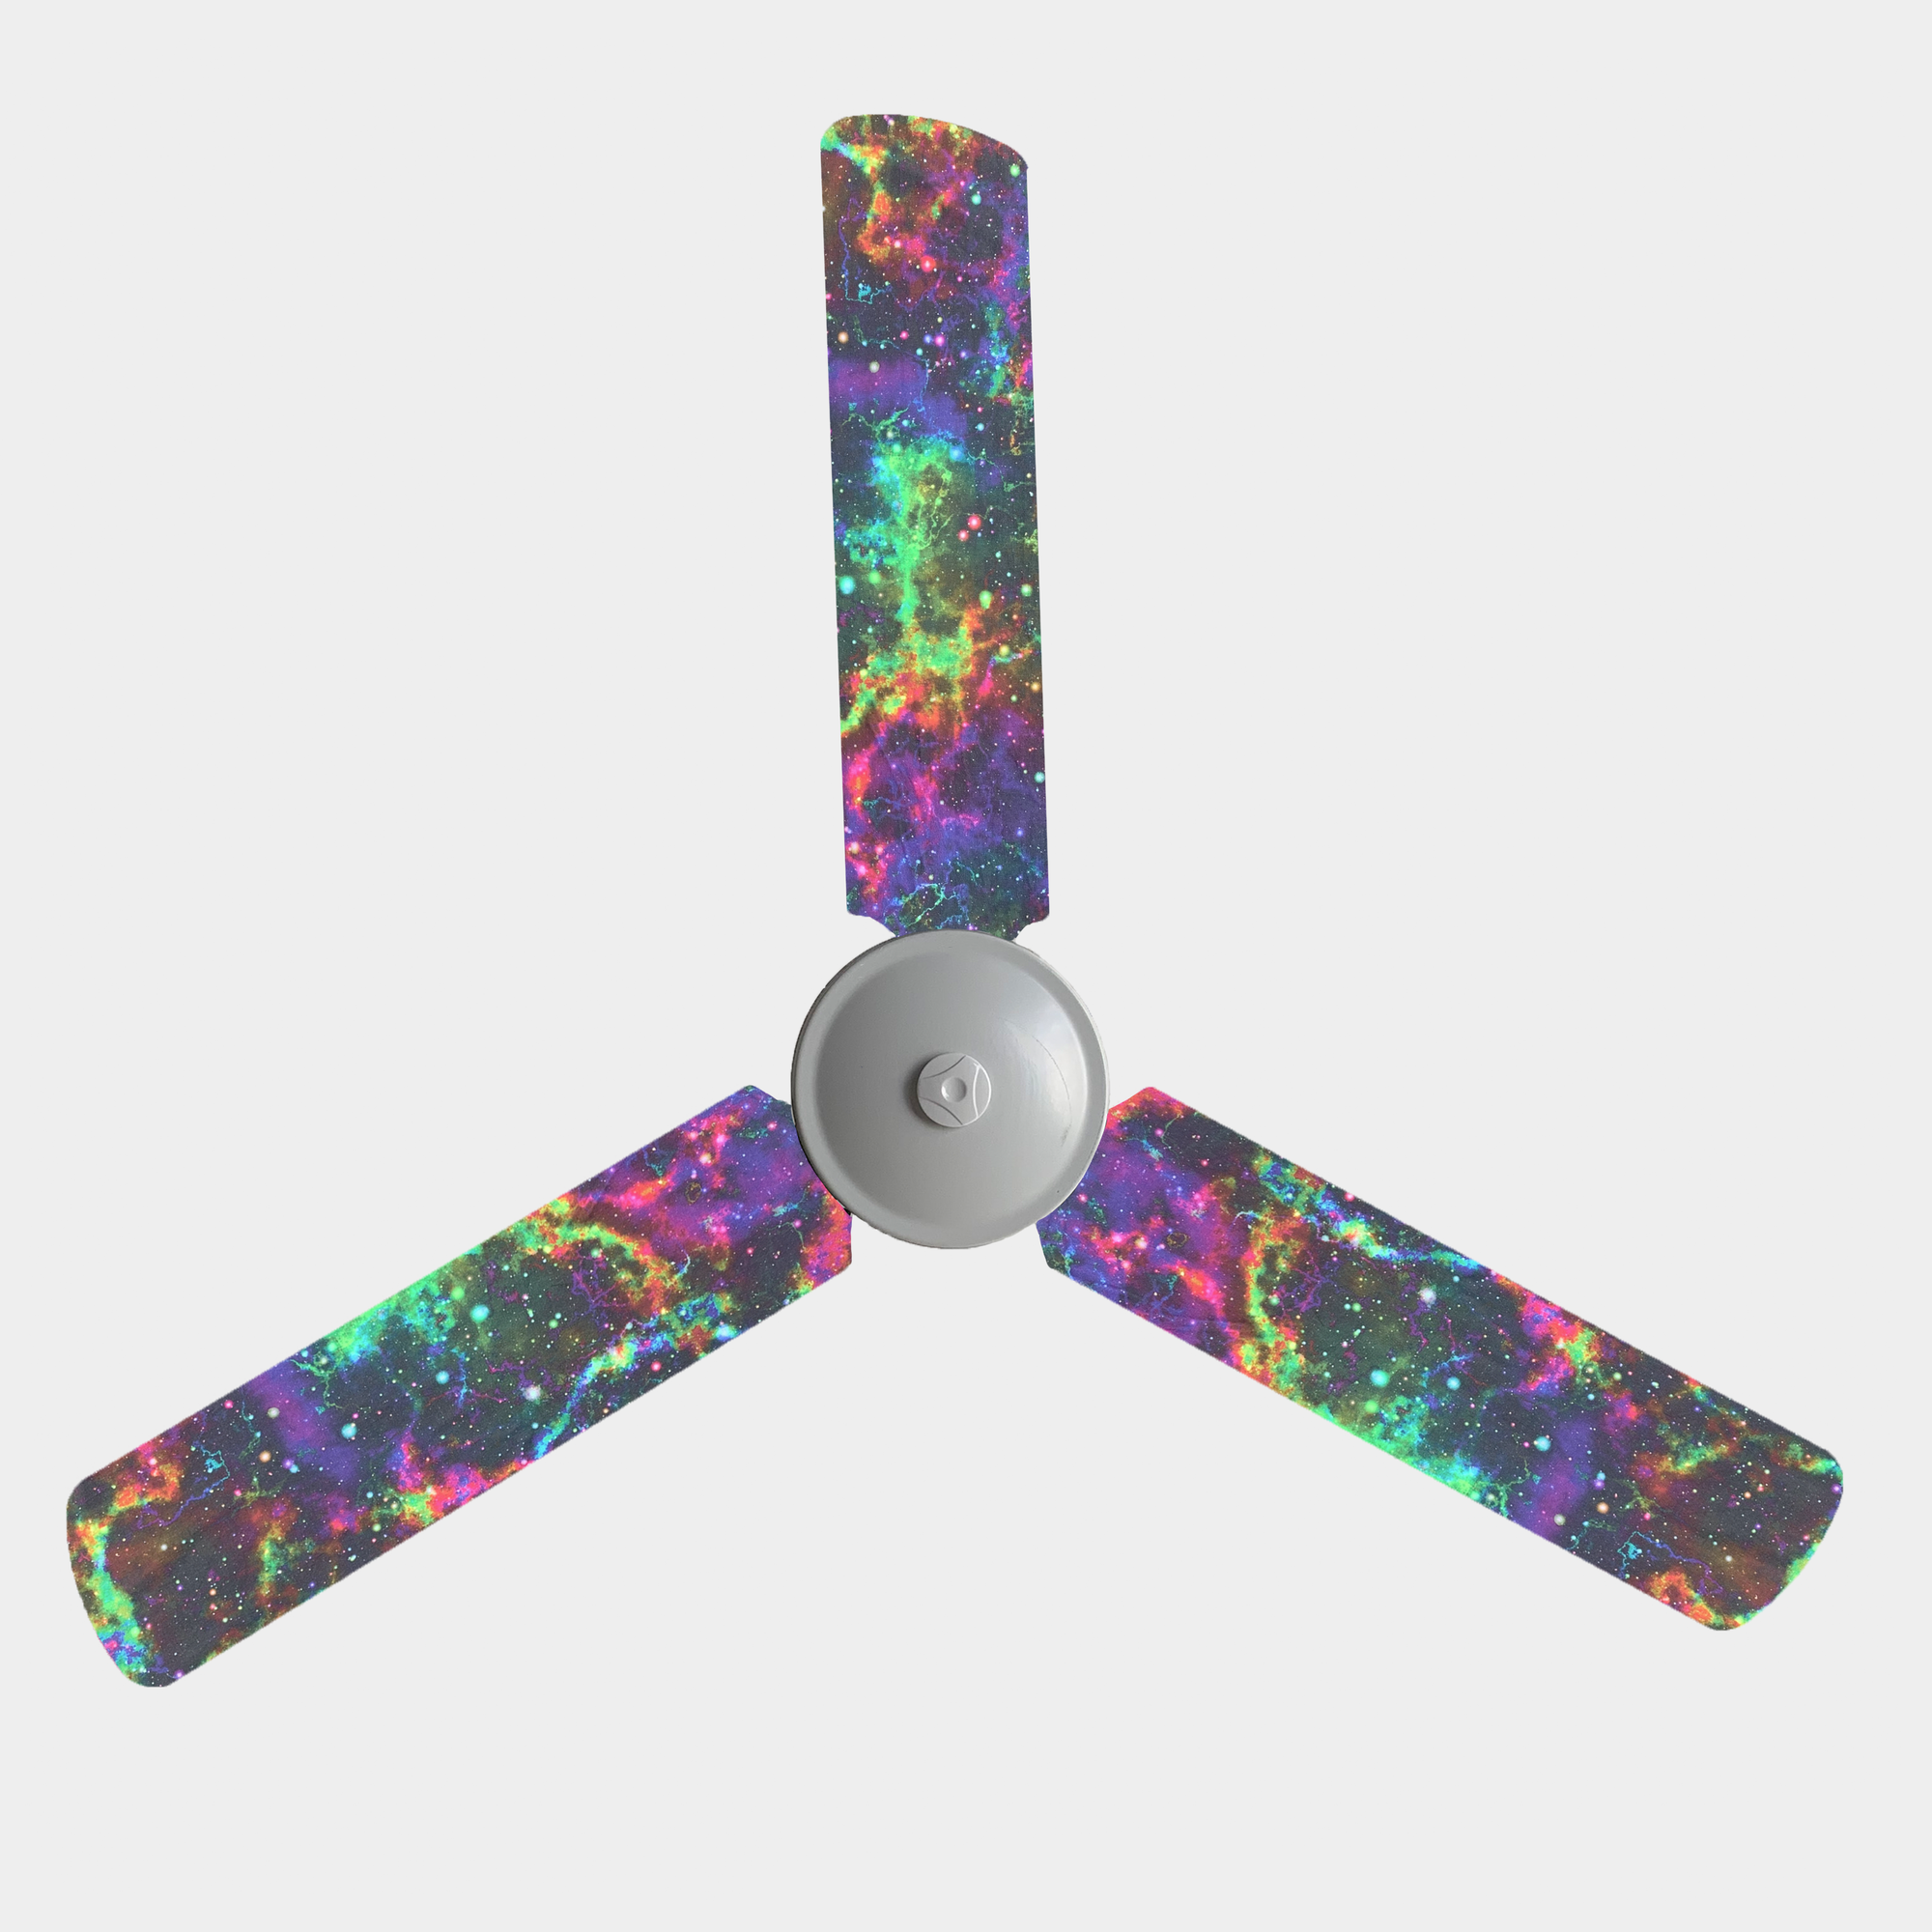 Bright coloured nebula galaxy design on a black background ceiling fan blade covers